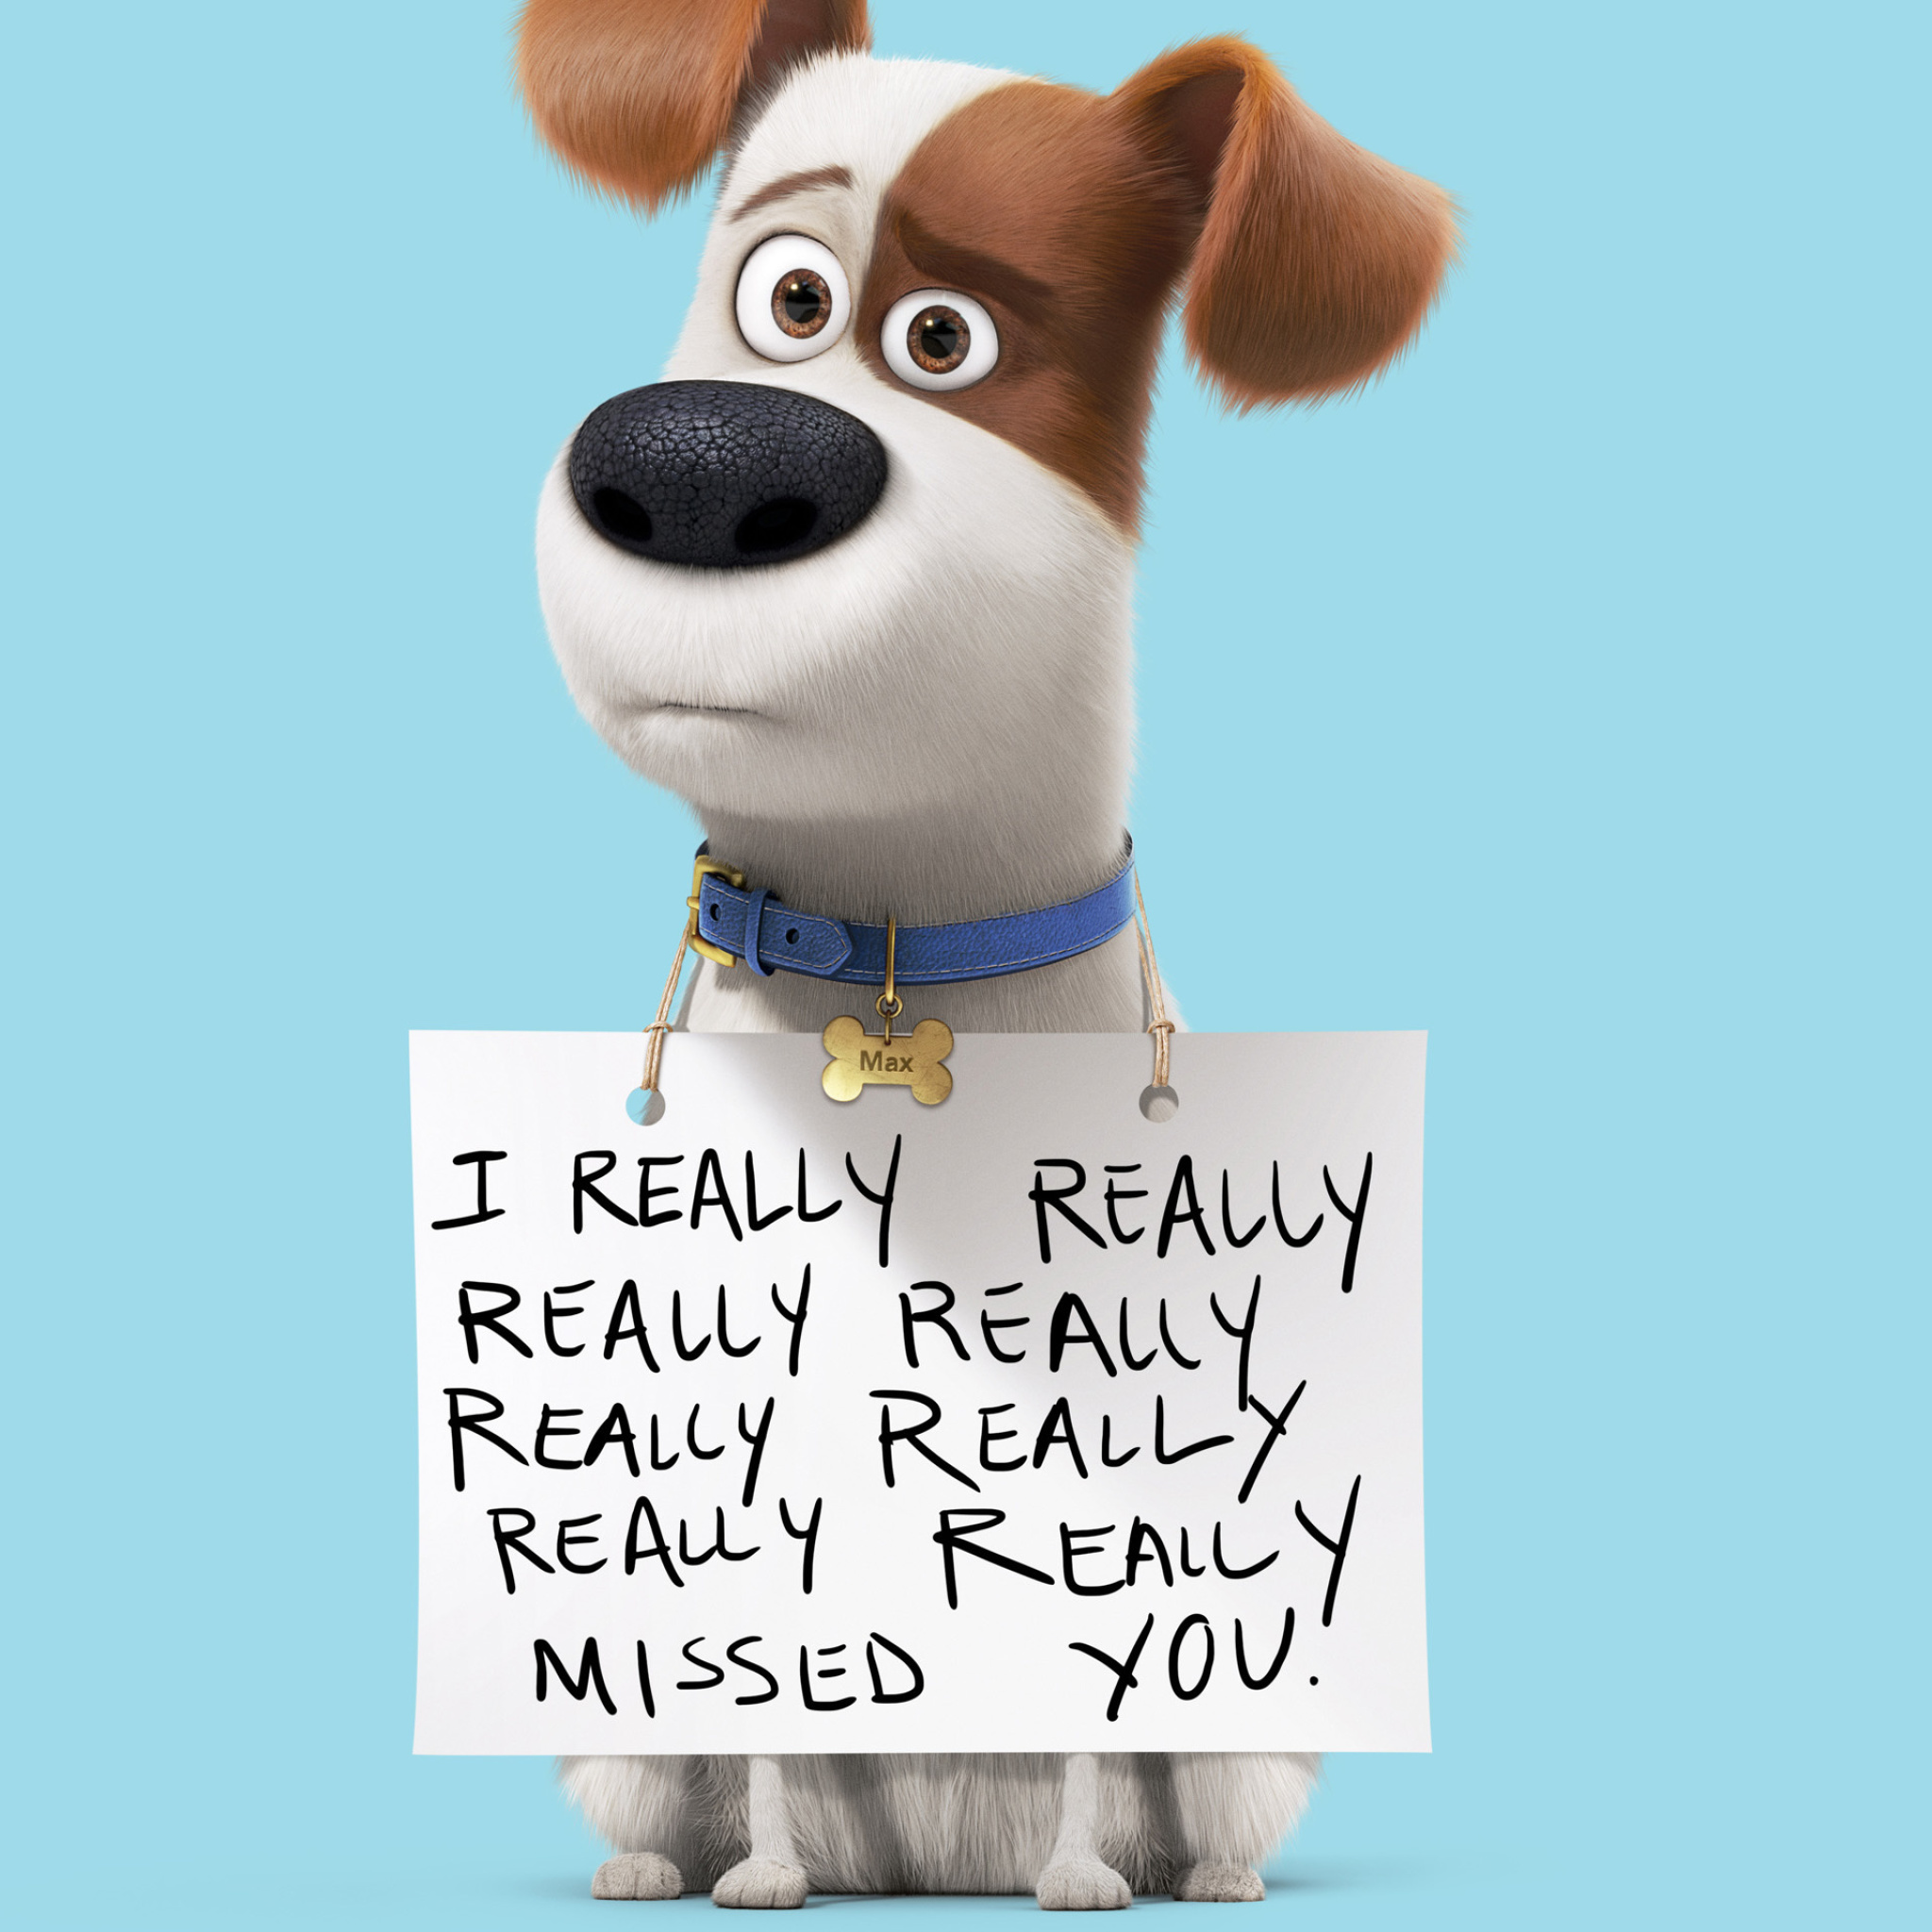 Max from The Secret Life of Pets screenshot #1 2048x2048